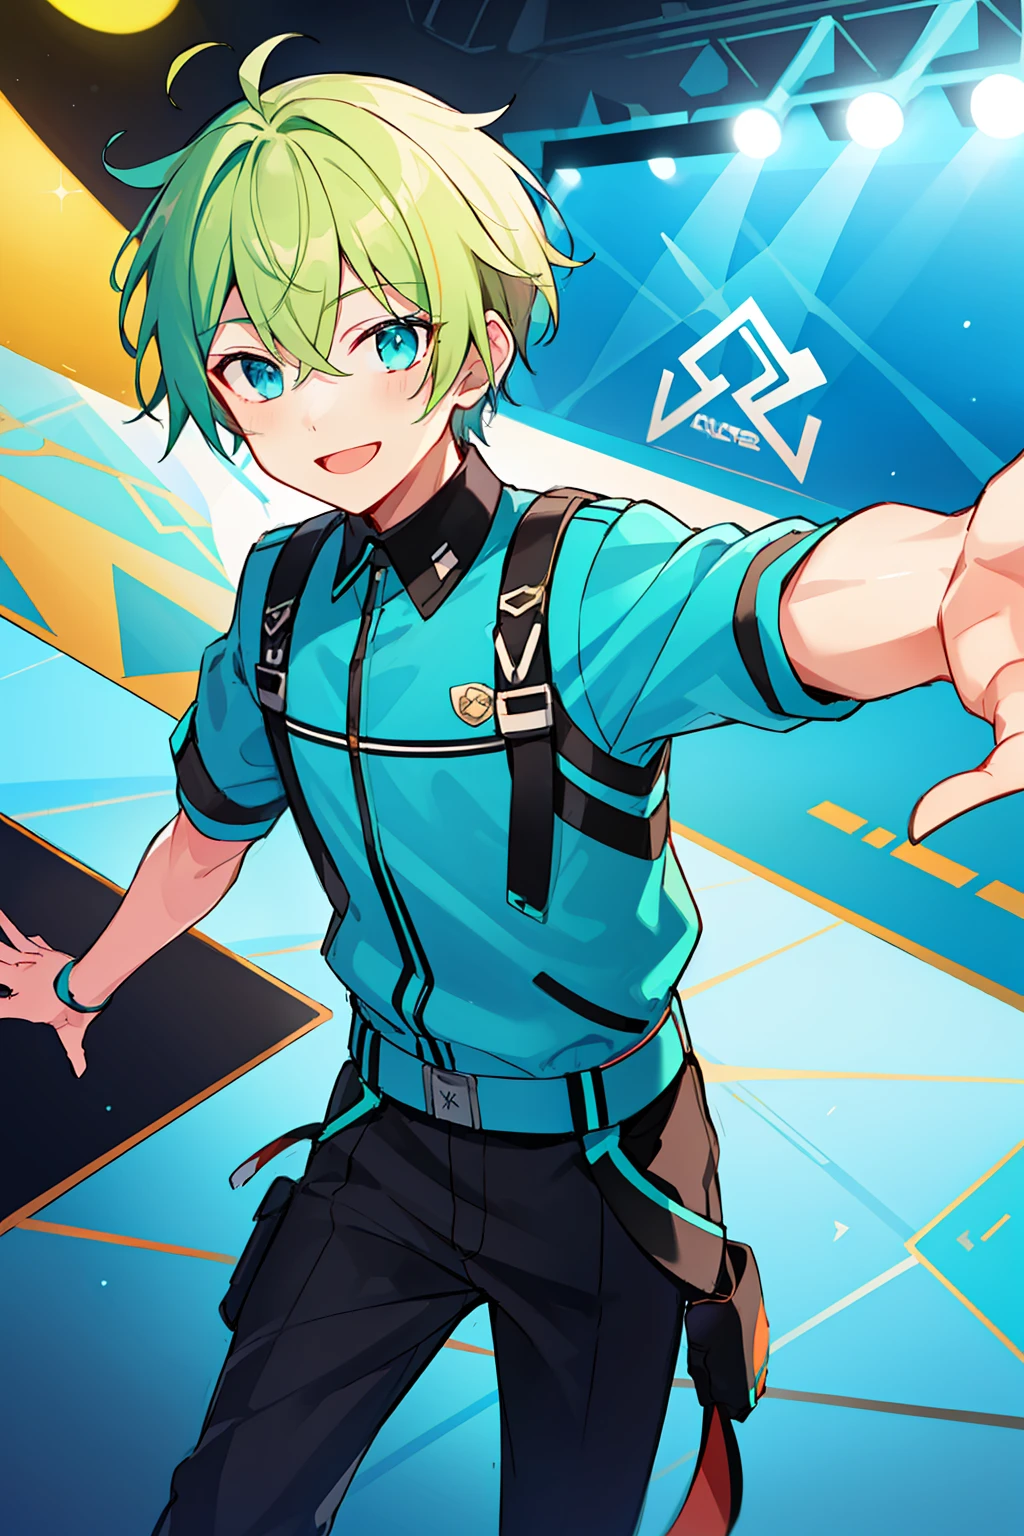 (high-quality, breathtaking),(expressive eyes, perfect face), 1boy, male, solo, short, young boy, short greenish blonde hair, teal eyes, smile, neon teal cyber outfit, pants, on stage